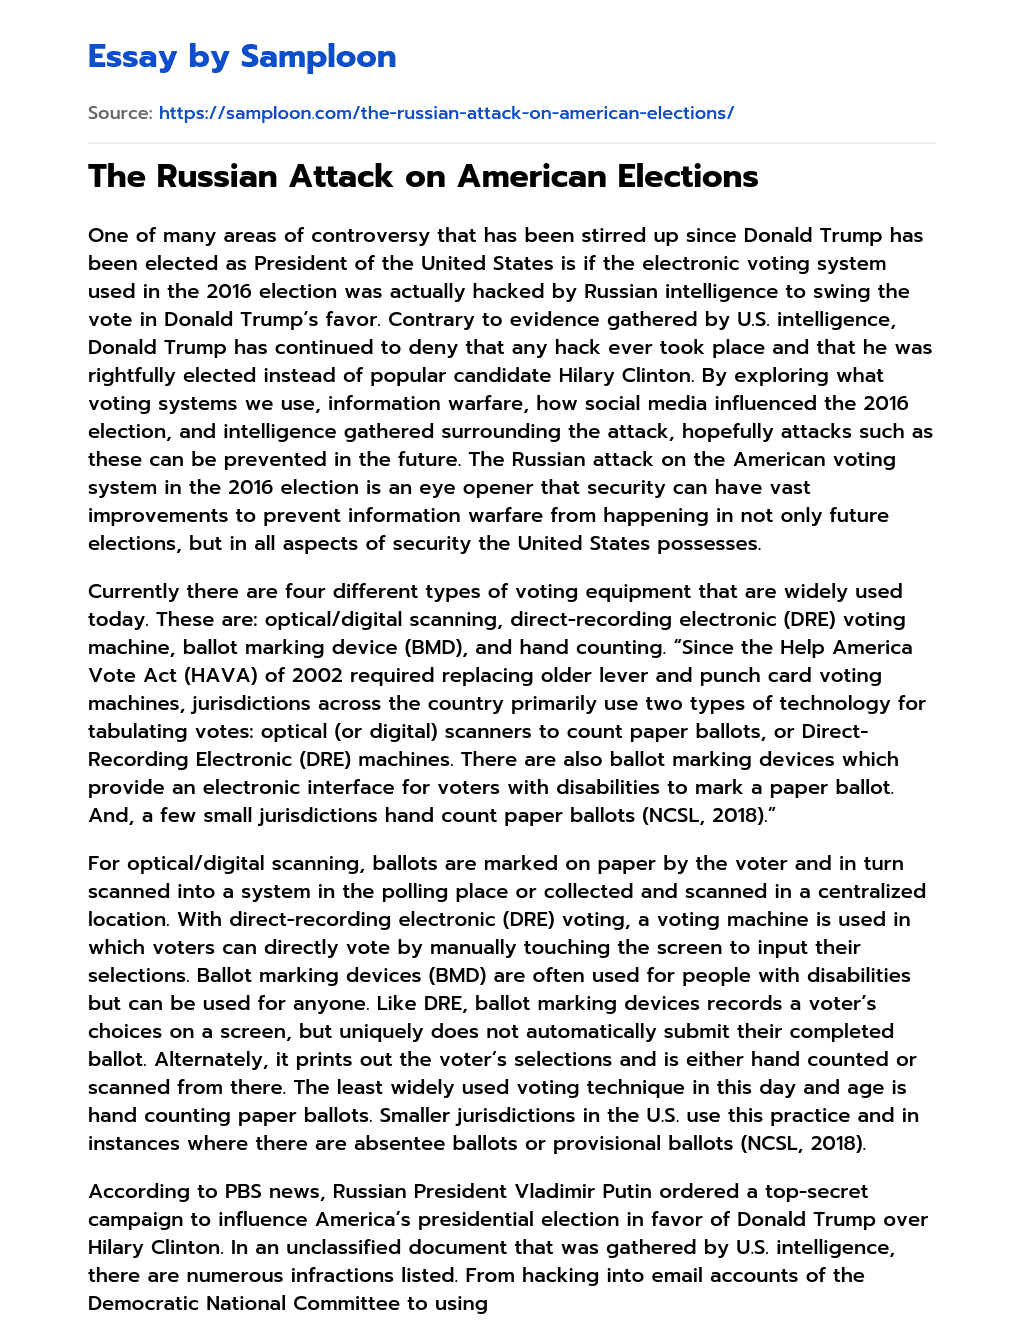 The Russian Attack on American Elections essay